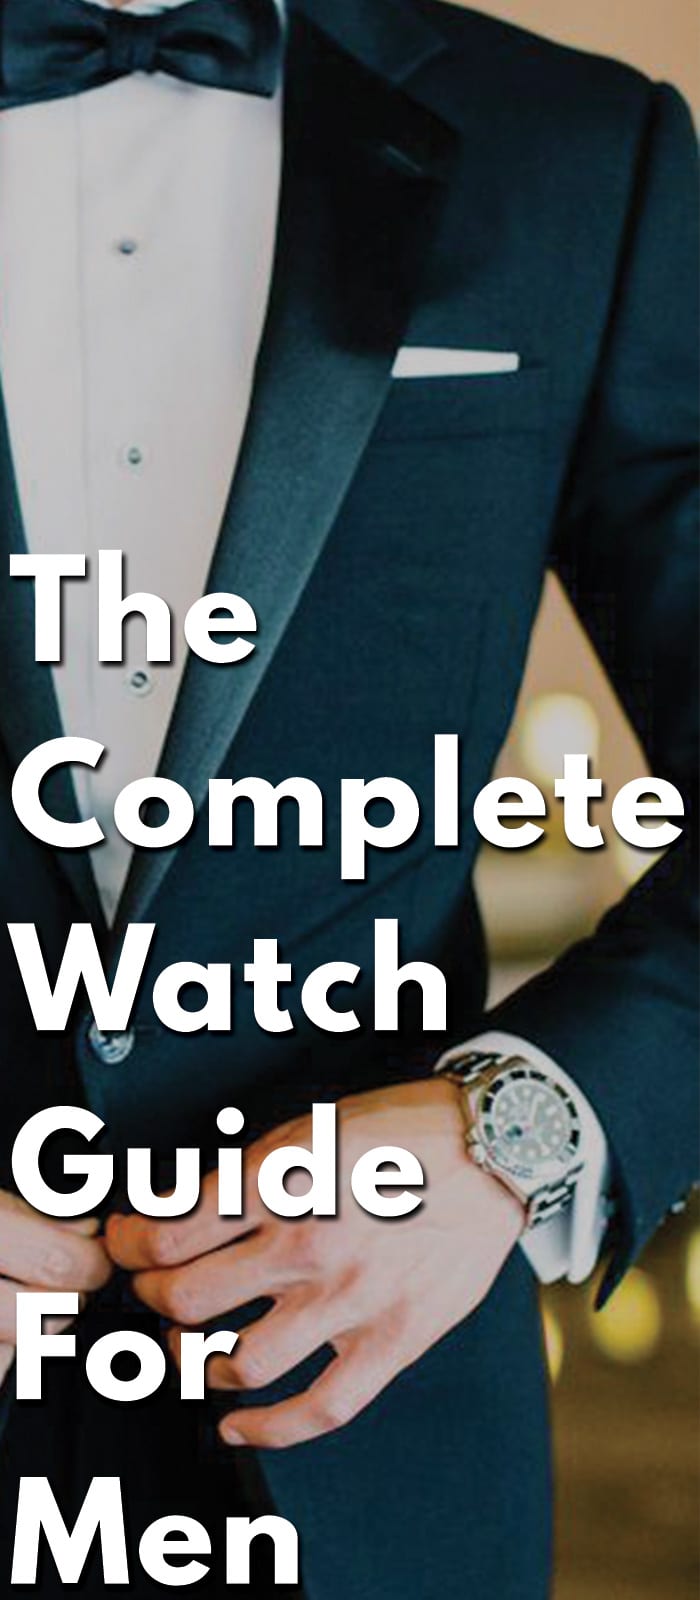 he Watch Guide- Pros & Cons